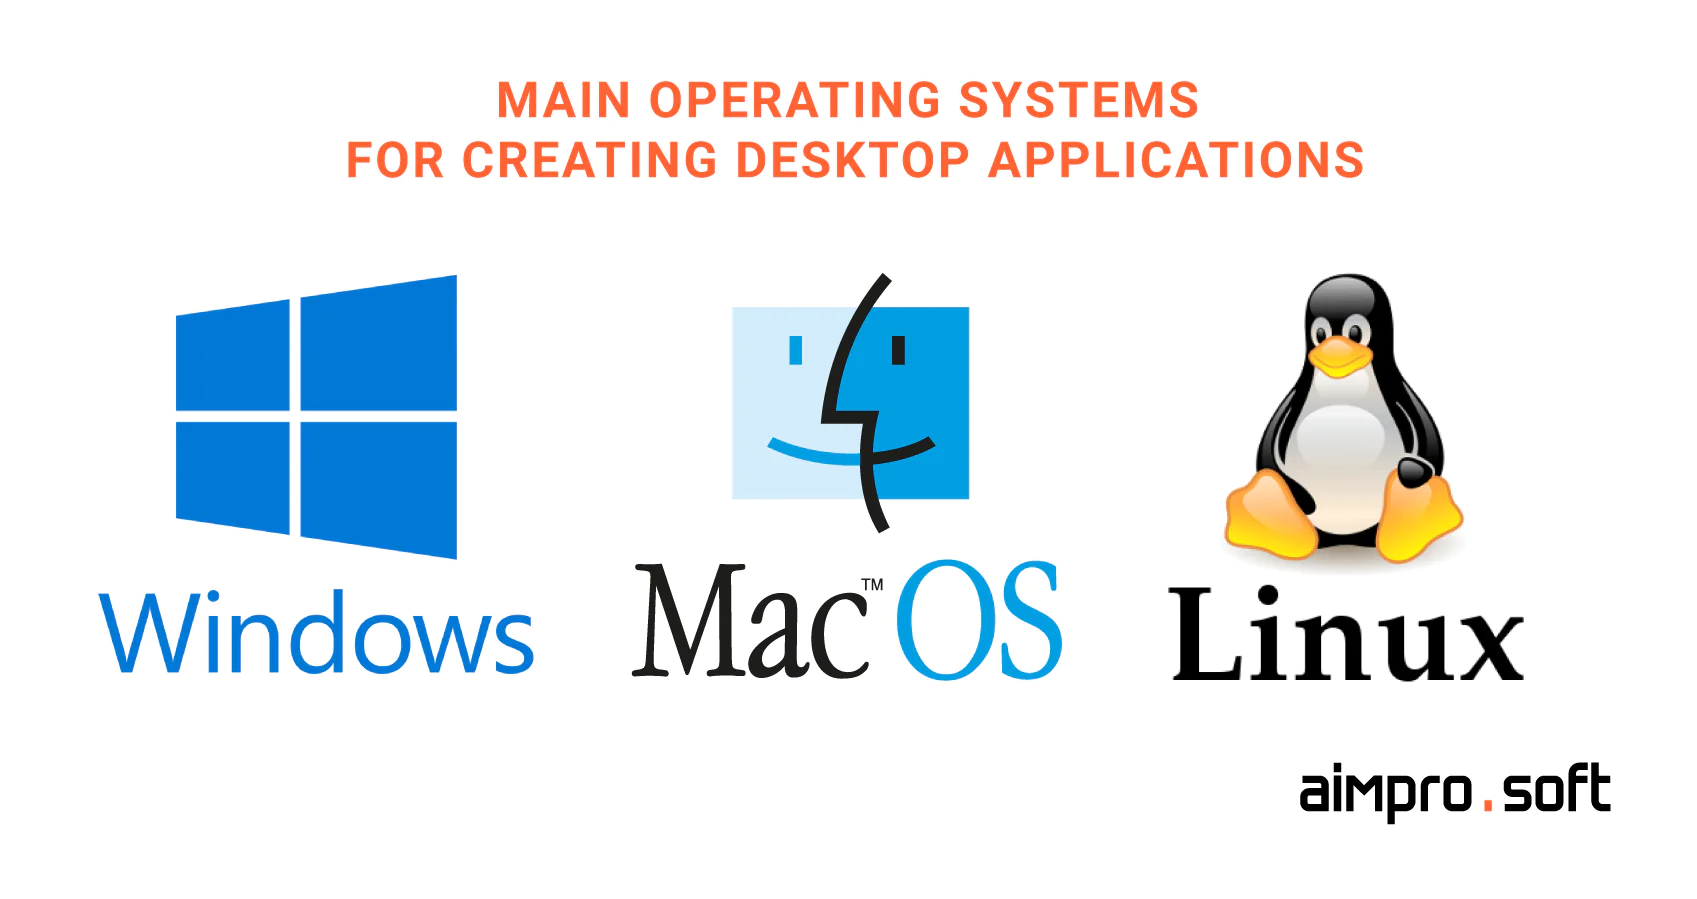 Main operating systems for creating desktop applications